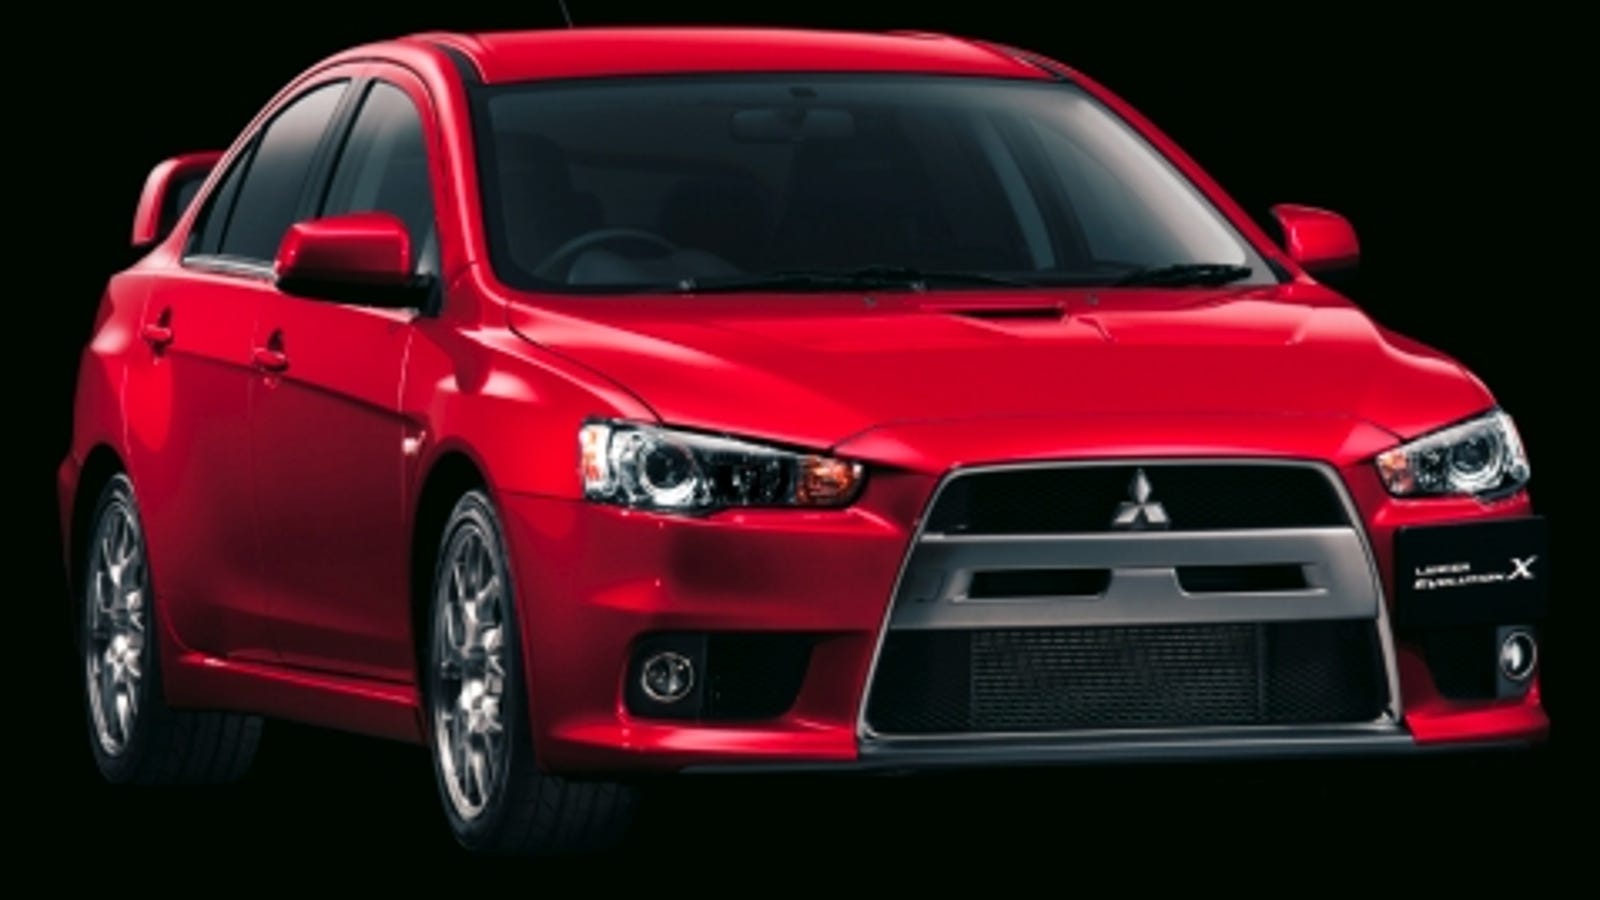 Mitsubishi Lancer Evolution X Launched in Japan